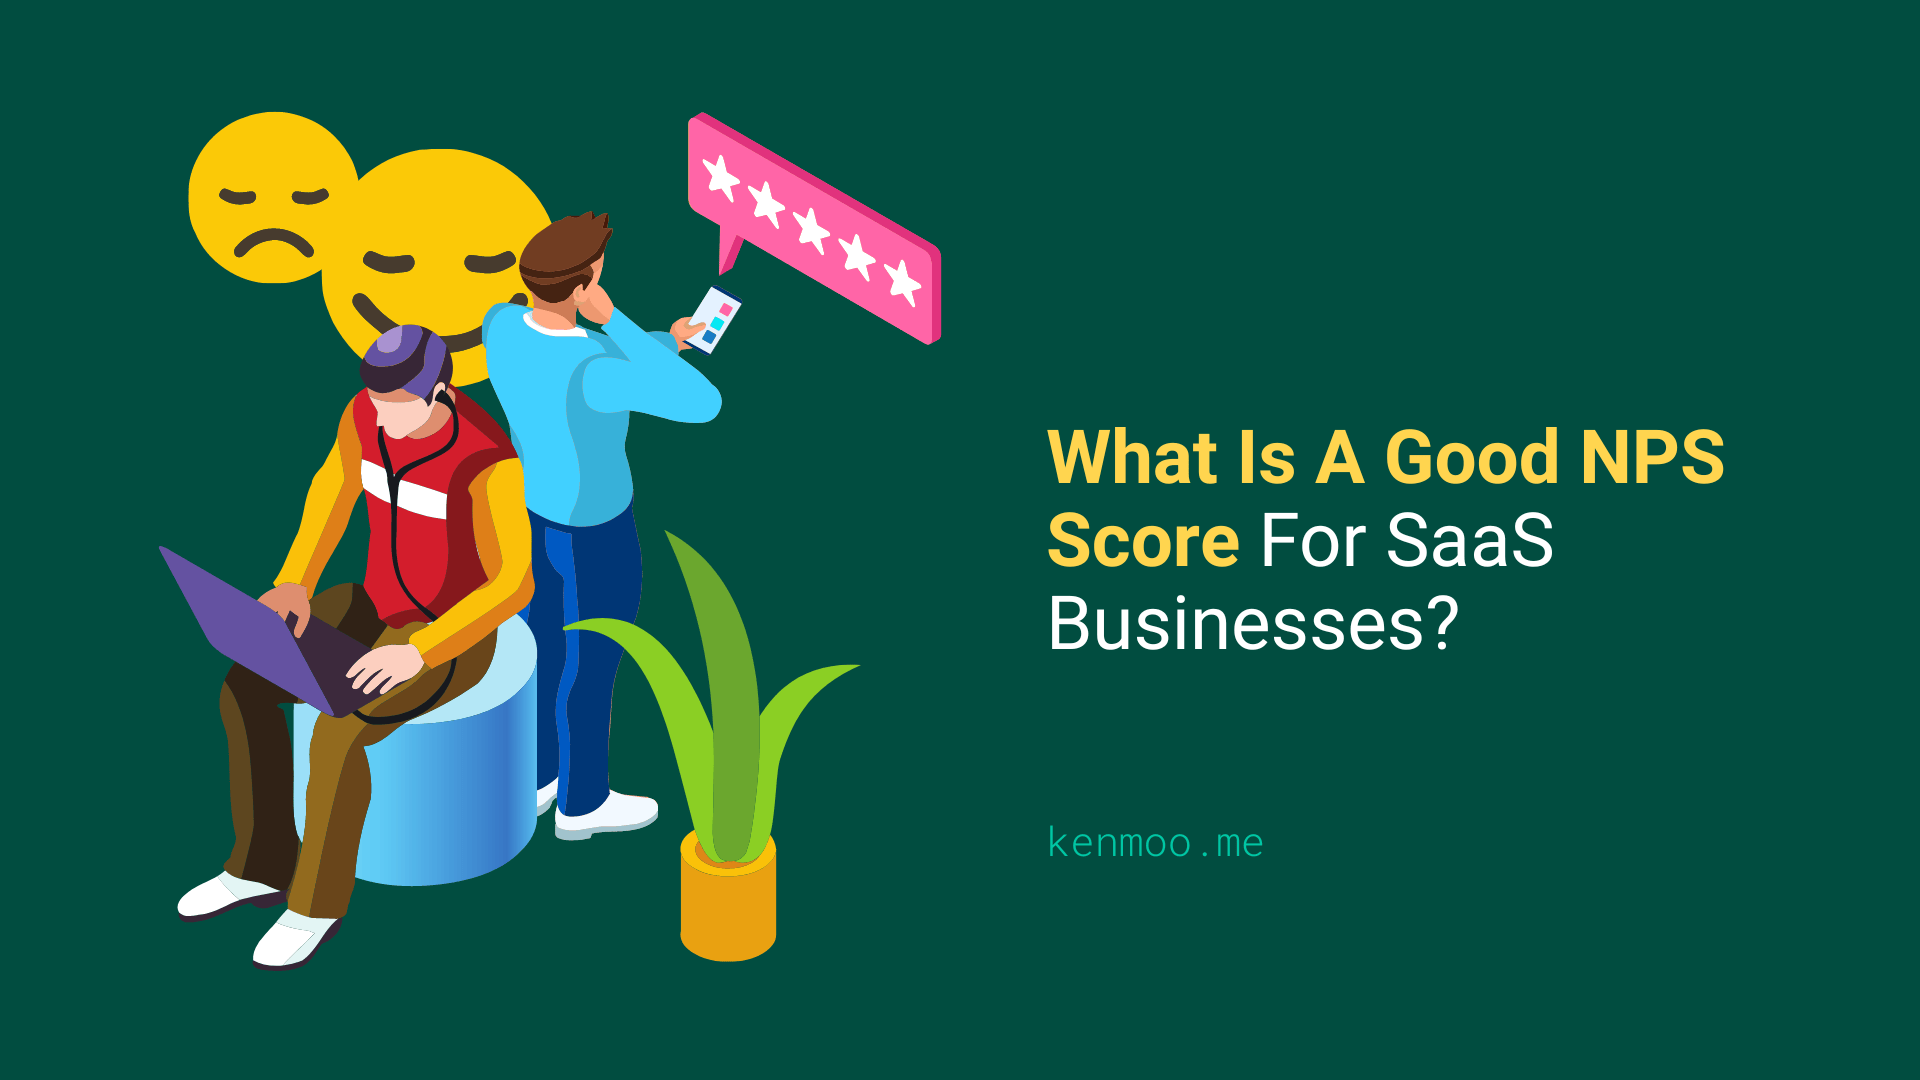 What Is A Good NPS Score For SaaS Businesses?